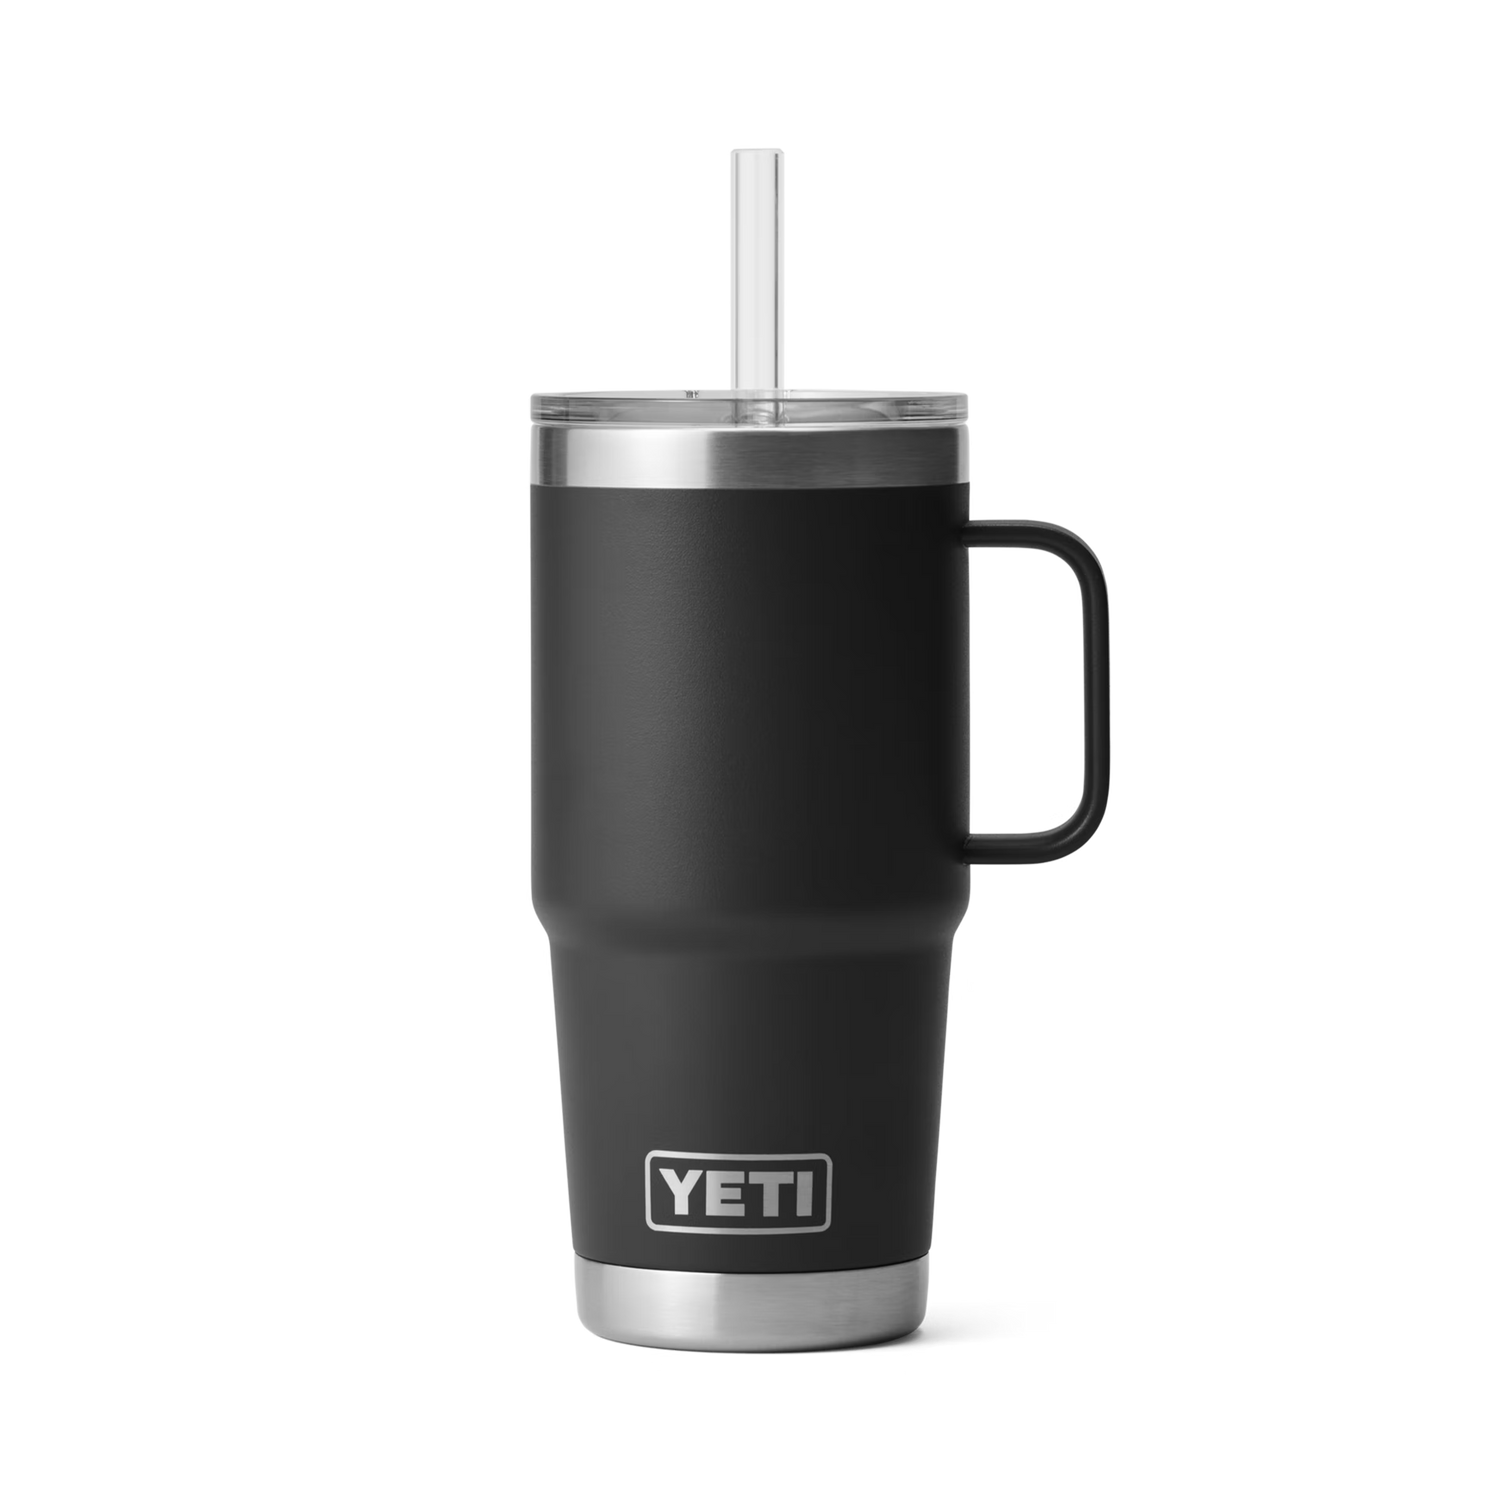 YETI Rambler 35oz Mug with Straw Lid - Chartreuse - BRAND NEW - IN HAND  PAIR - 2